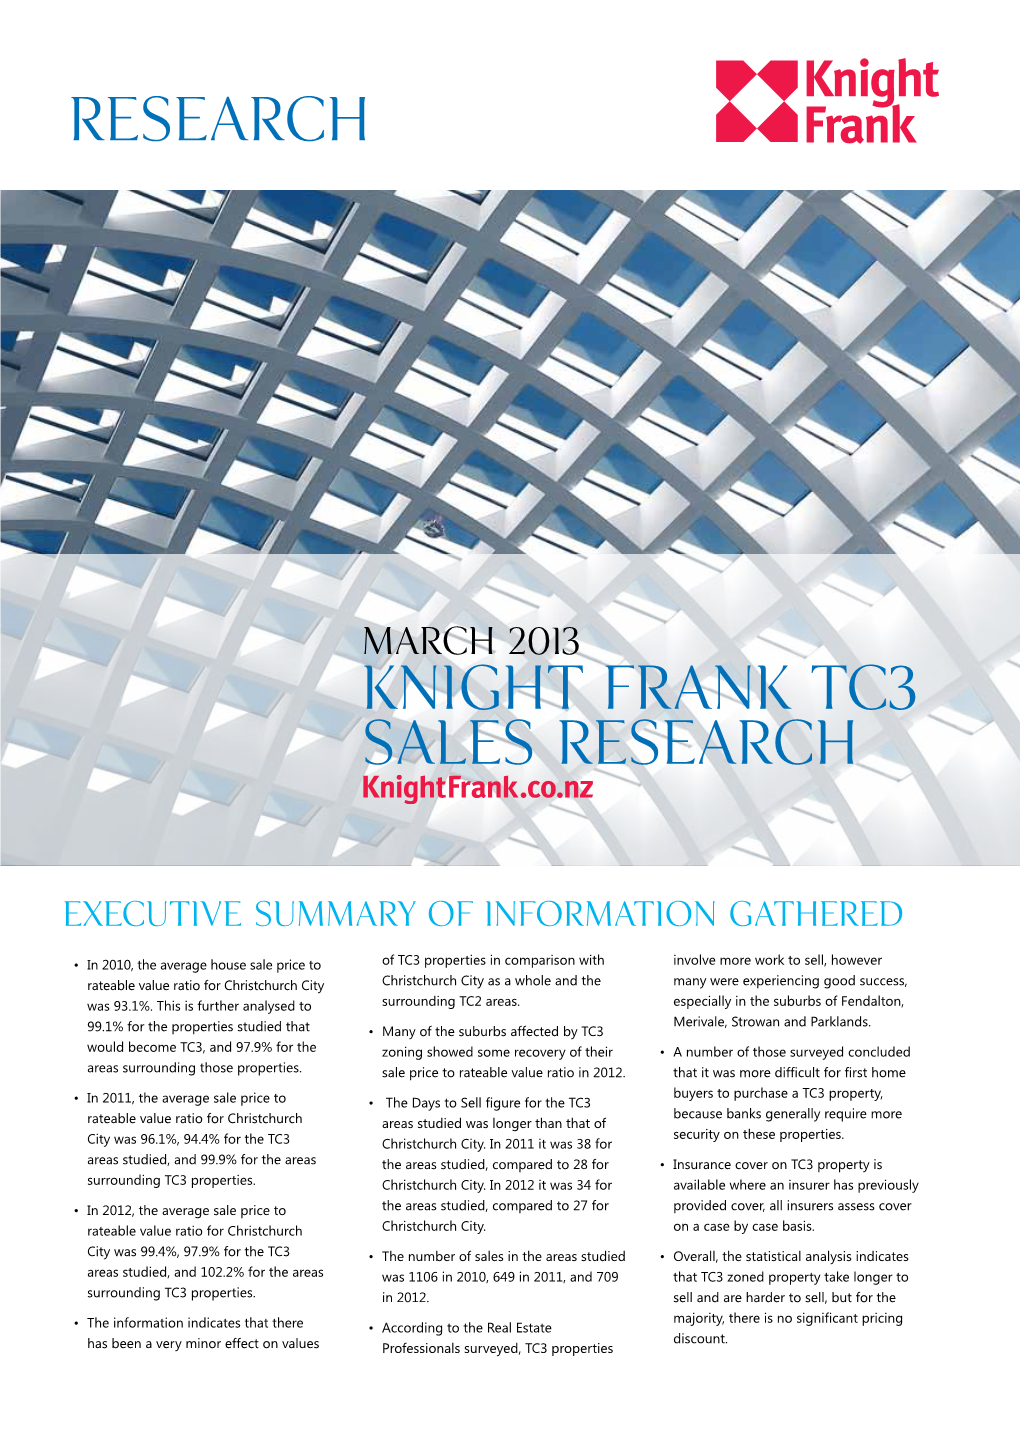 Research KNIGHT FRANK TC3 SALES RESEARCH